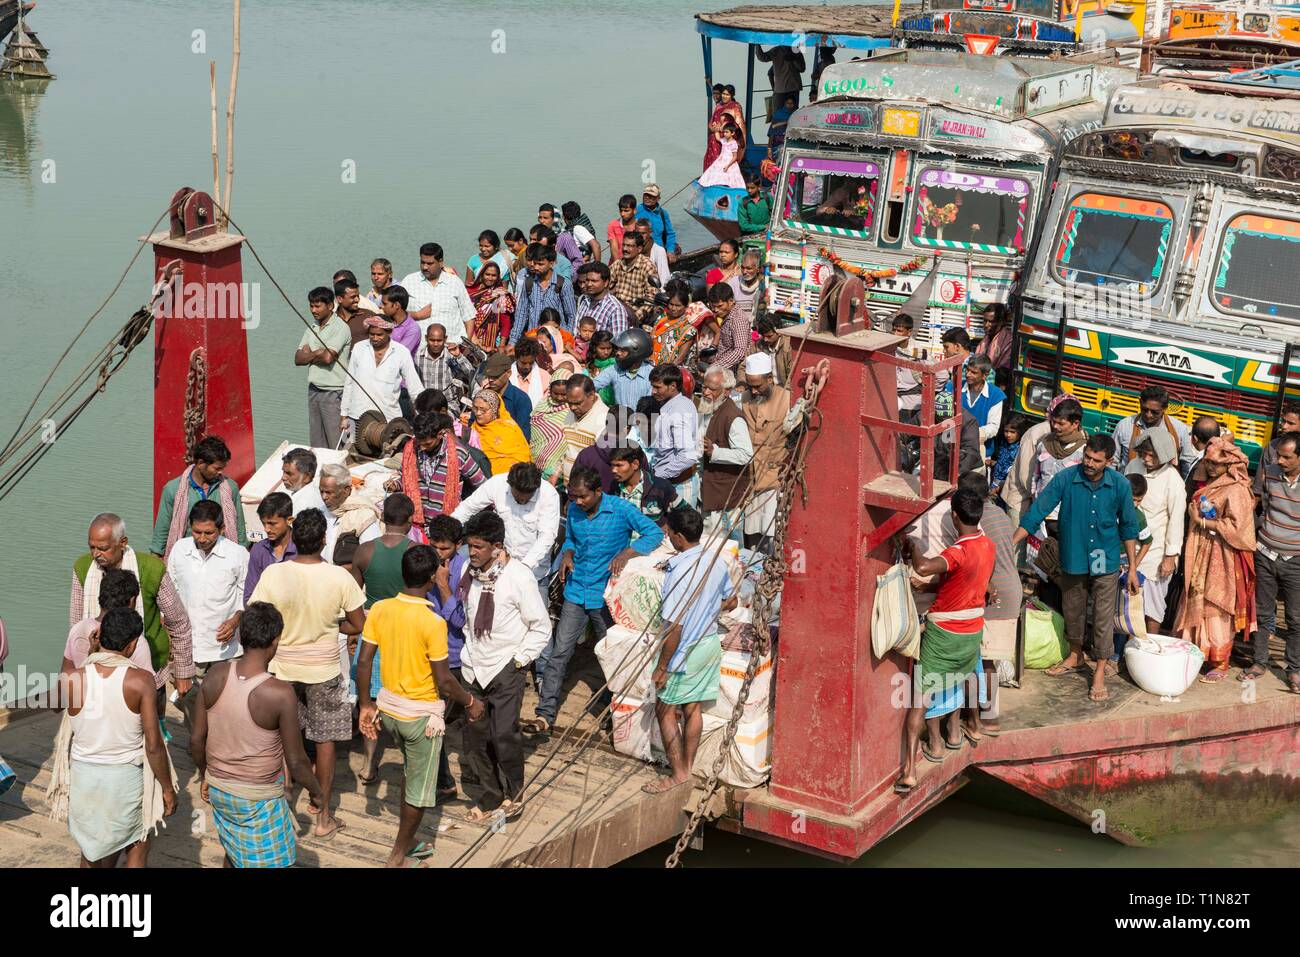 INDIA, BIHAR, RAJMAHAL,Ferry approaching the pier of Rajmahal after crossing the river Ganges Stock Photo